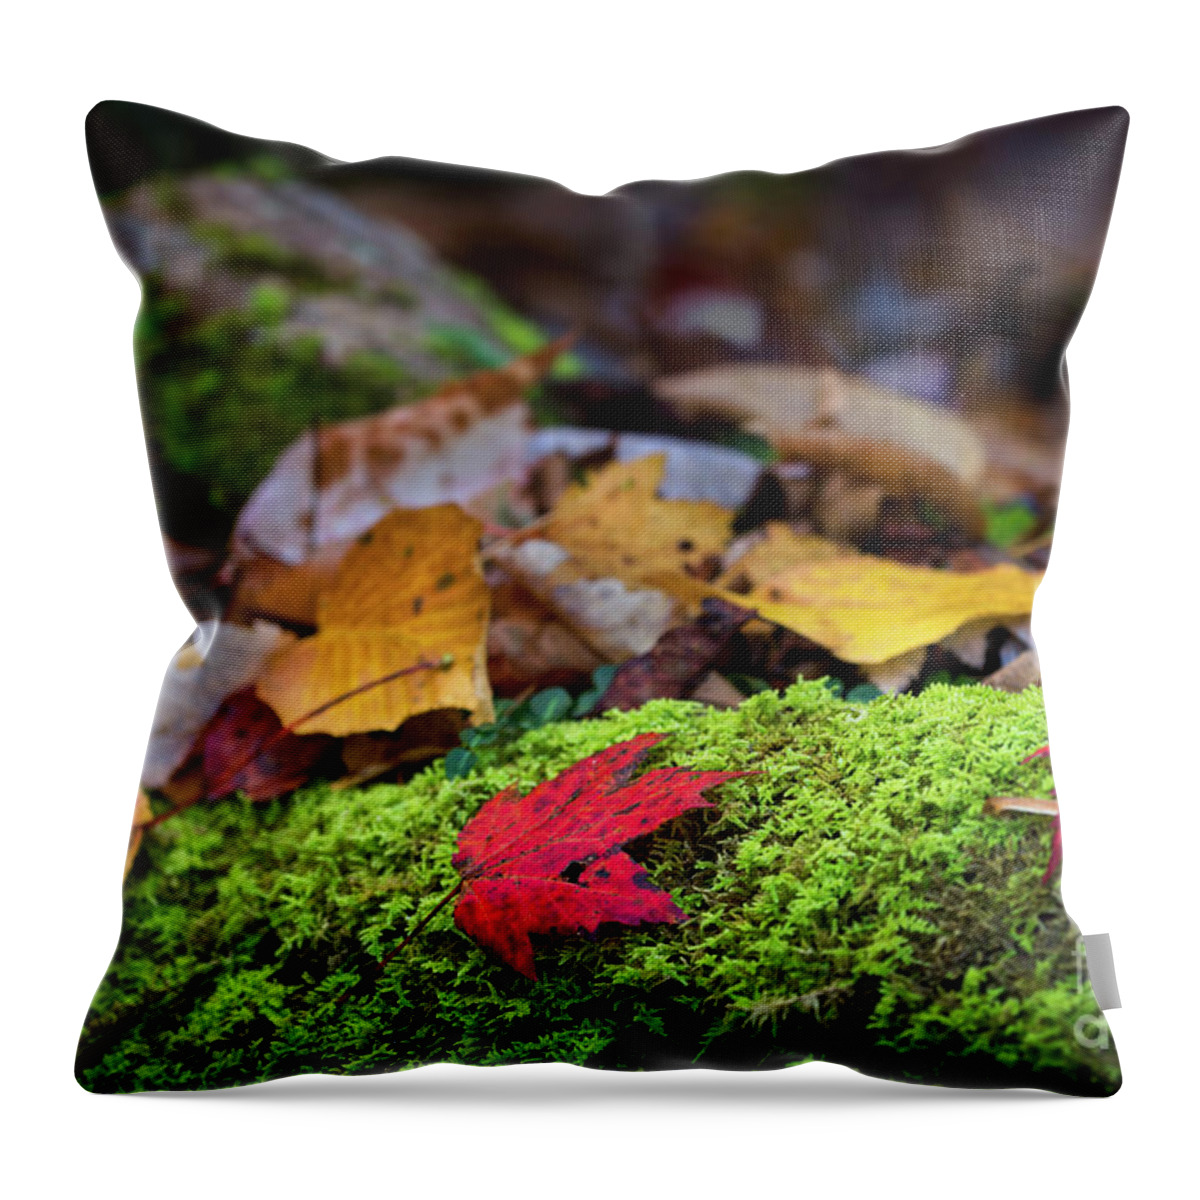 Brilliant Fall Foliage Throw Pillow featuring the photograph Brilliant Fall Foliage by Doug Sturgess